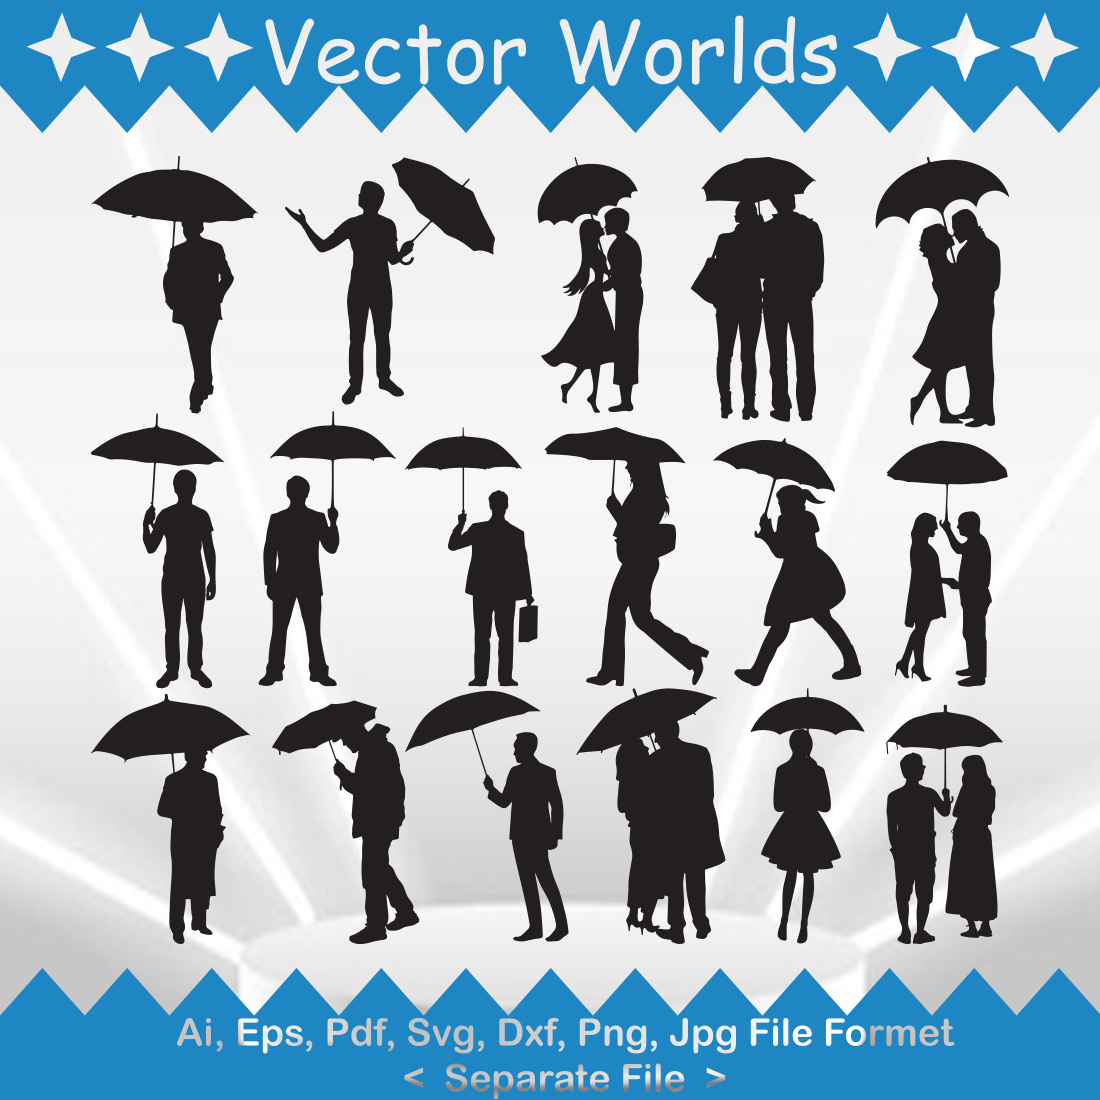 People With Umbrella SVG Vector Design cover image.